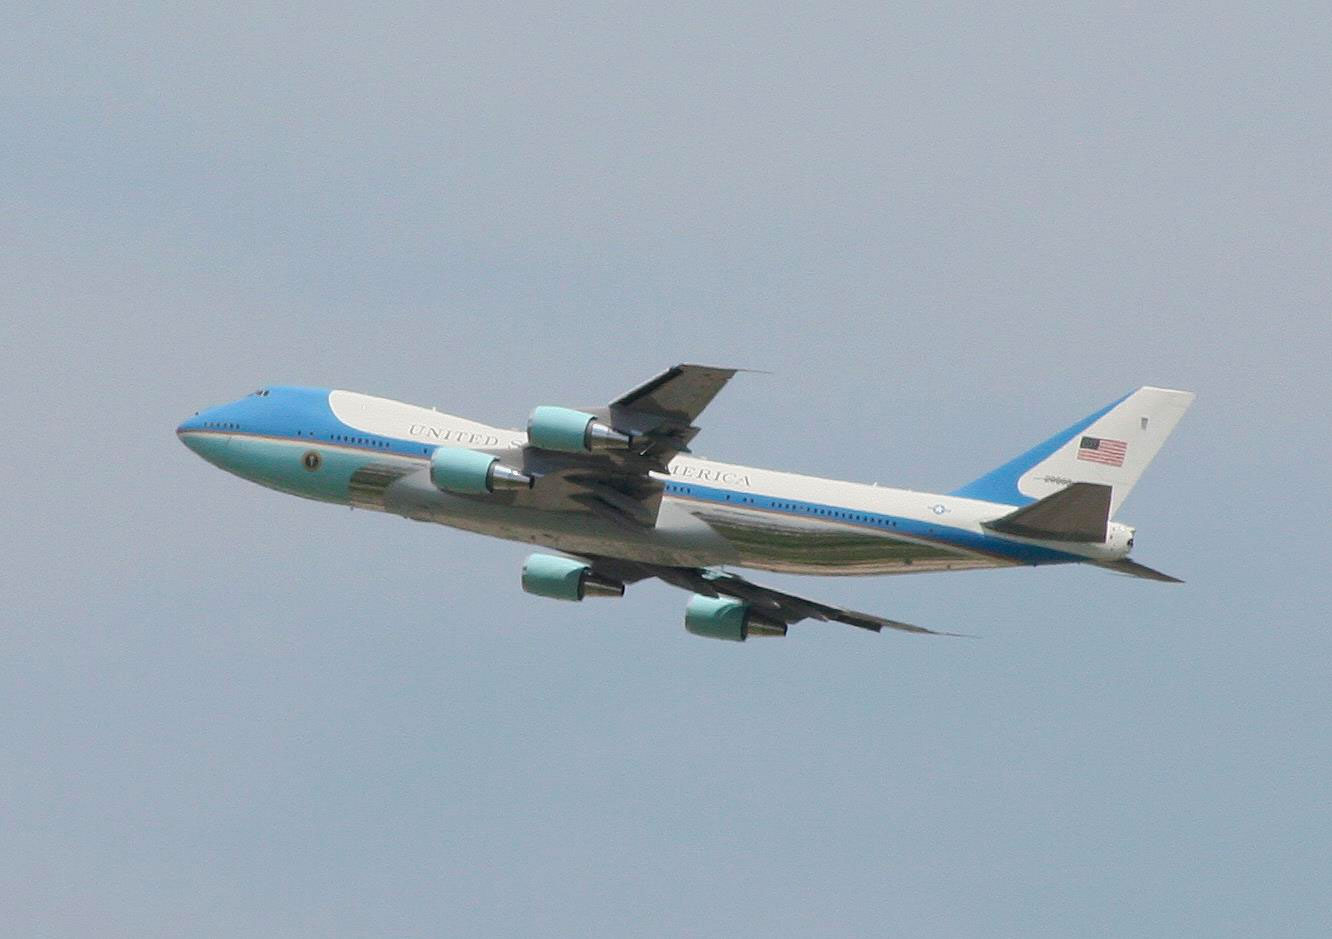 Air Force 1 taking off from O'Hare International Airport in 2011.